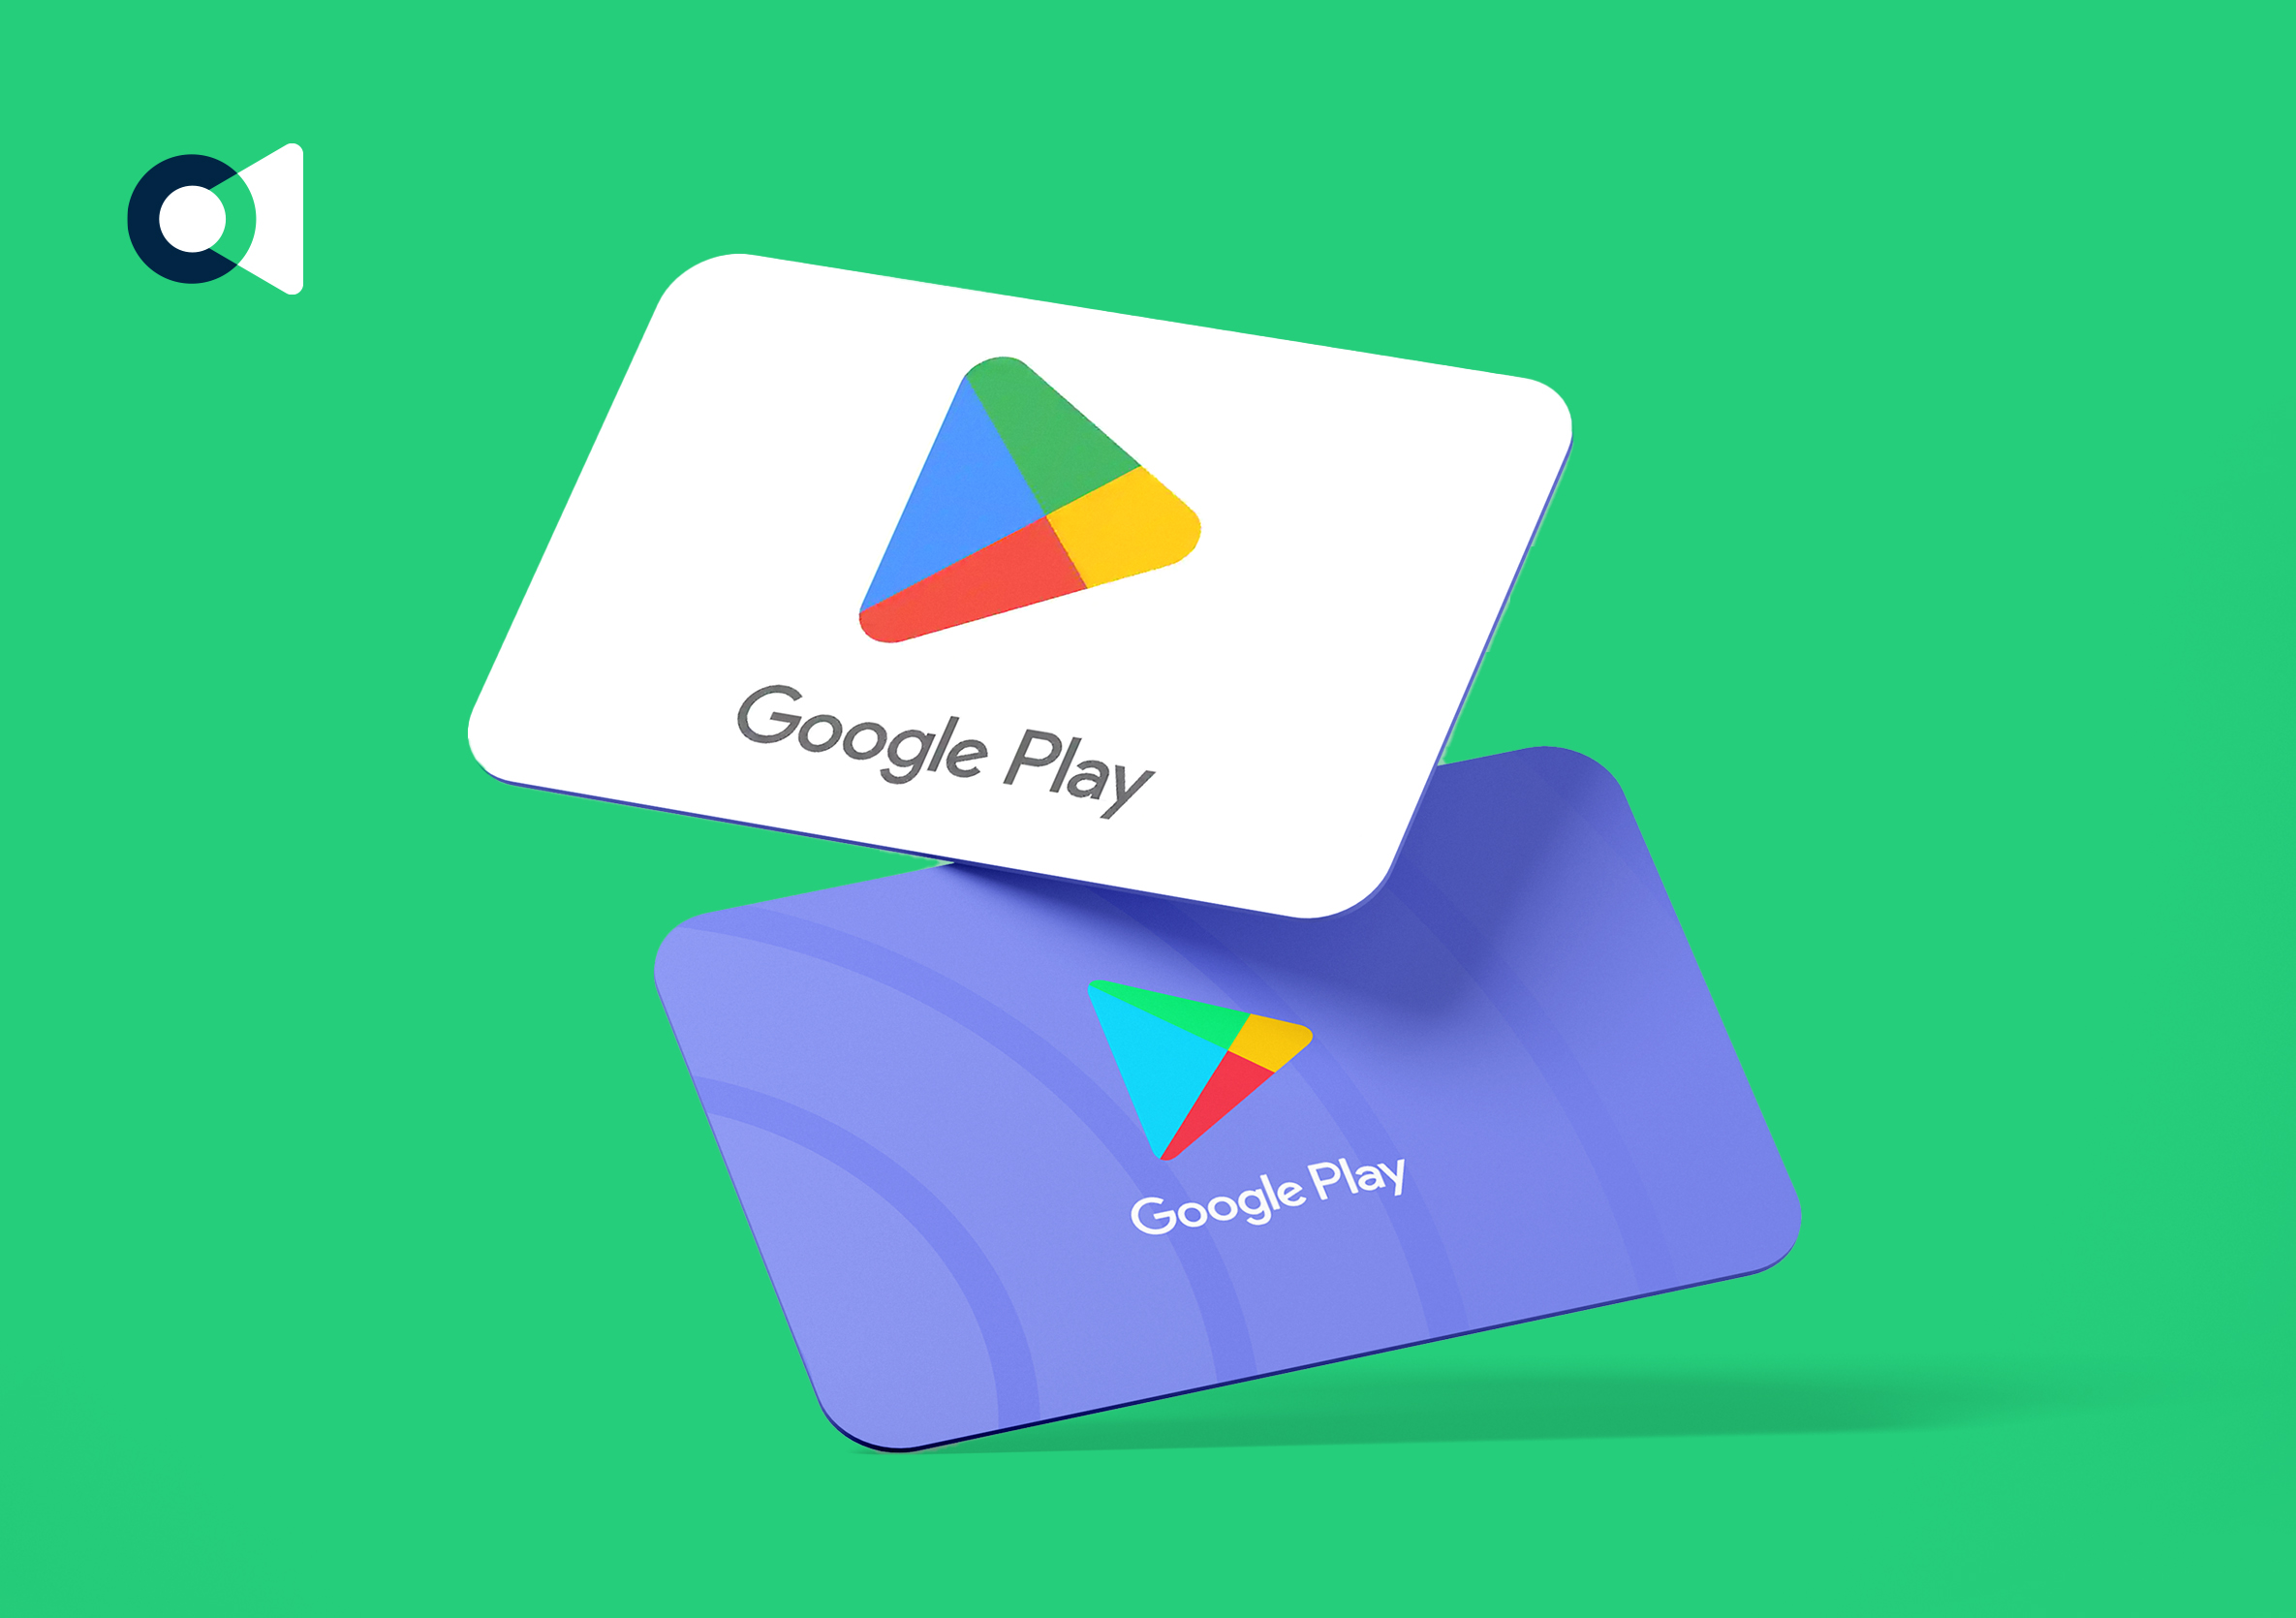 [Subscription] Google Play Payment - The Spotify Community